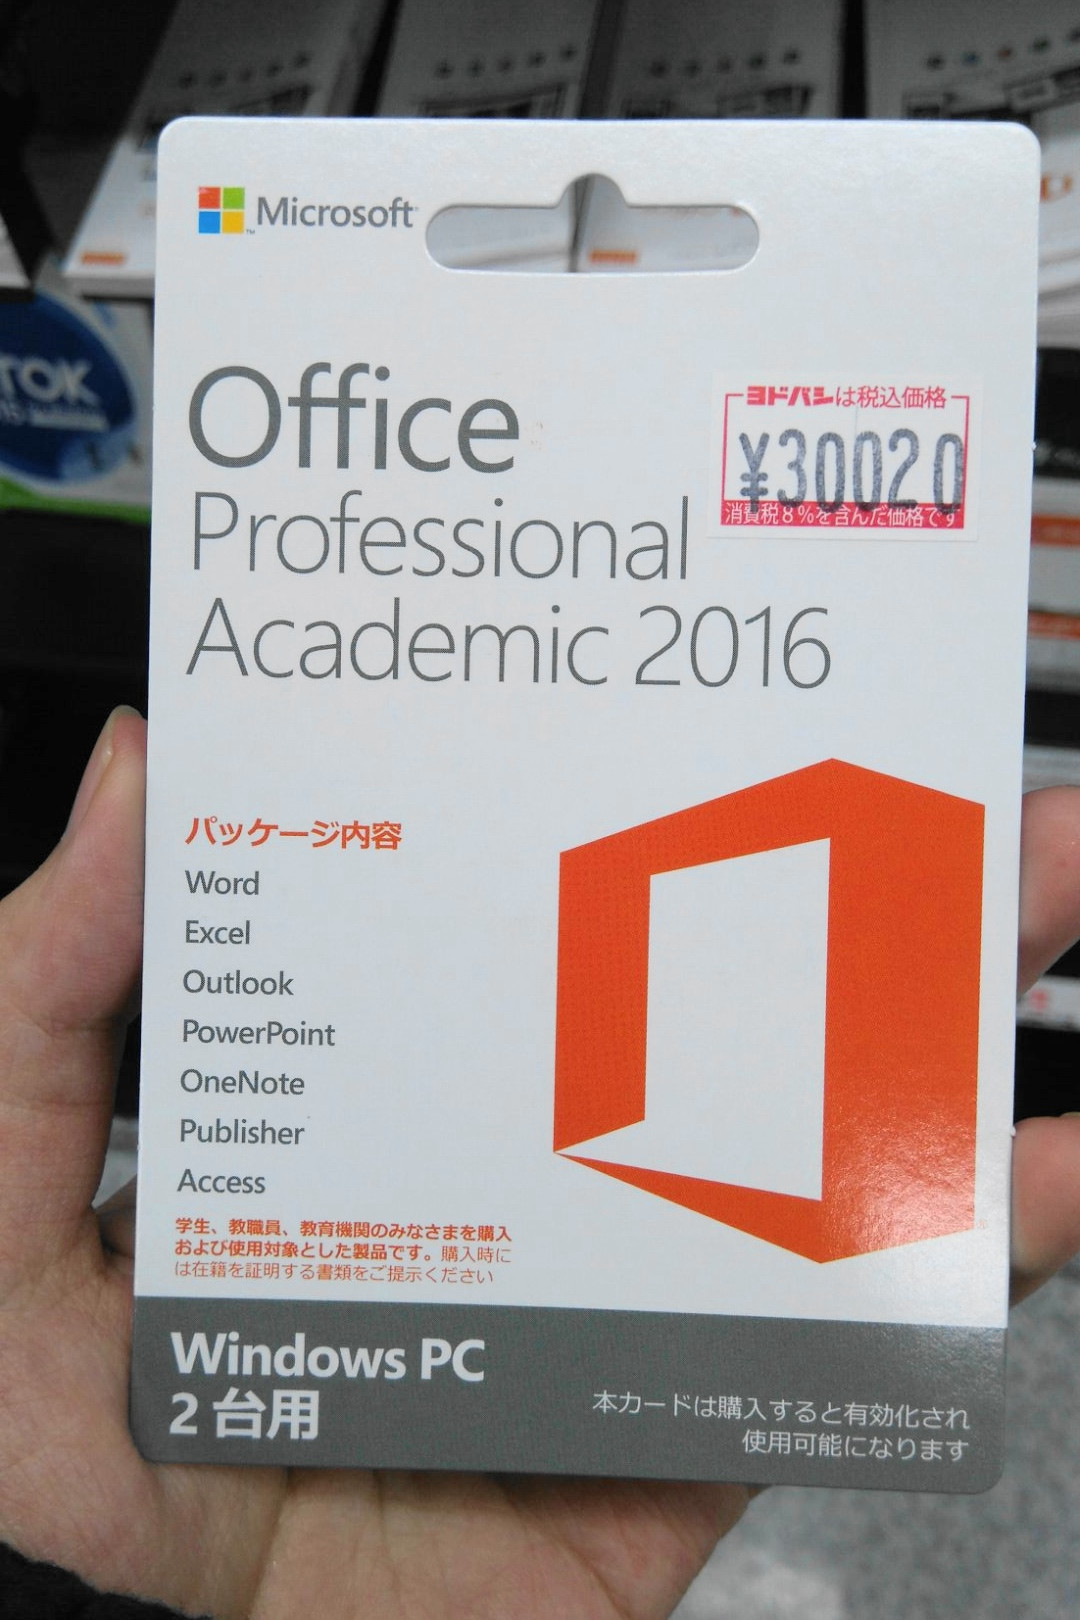 microsoft office professional 2010 free download for windows 7 32 bit